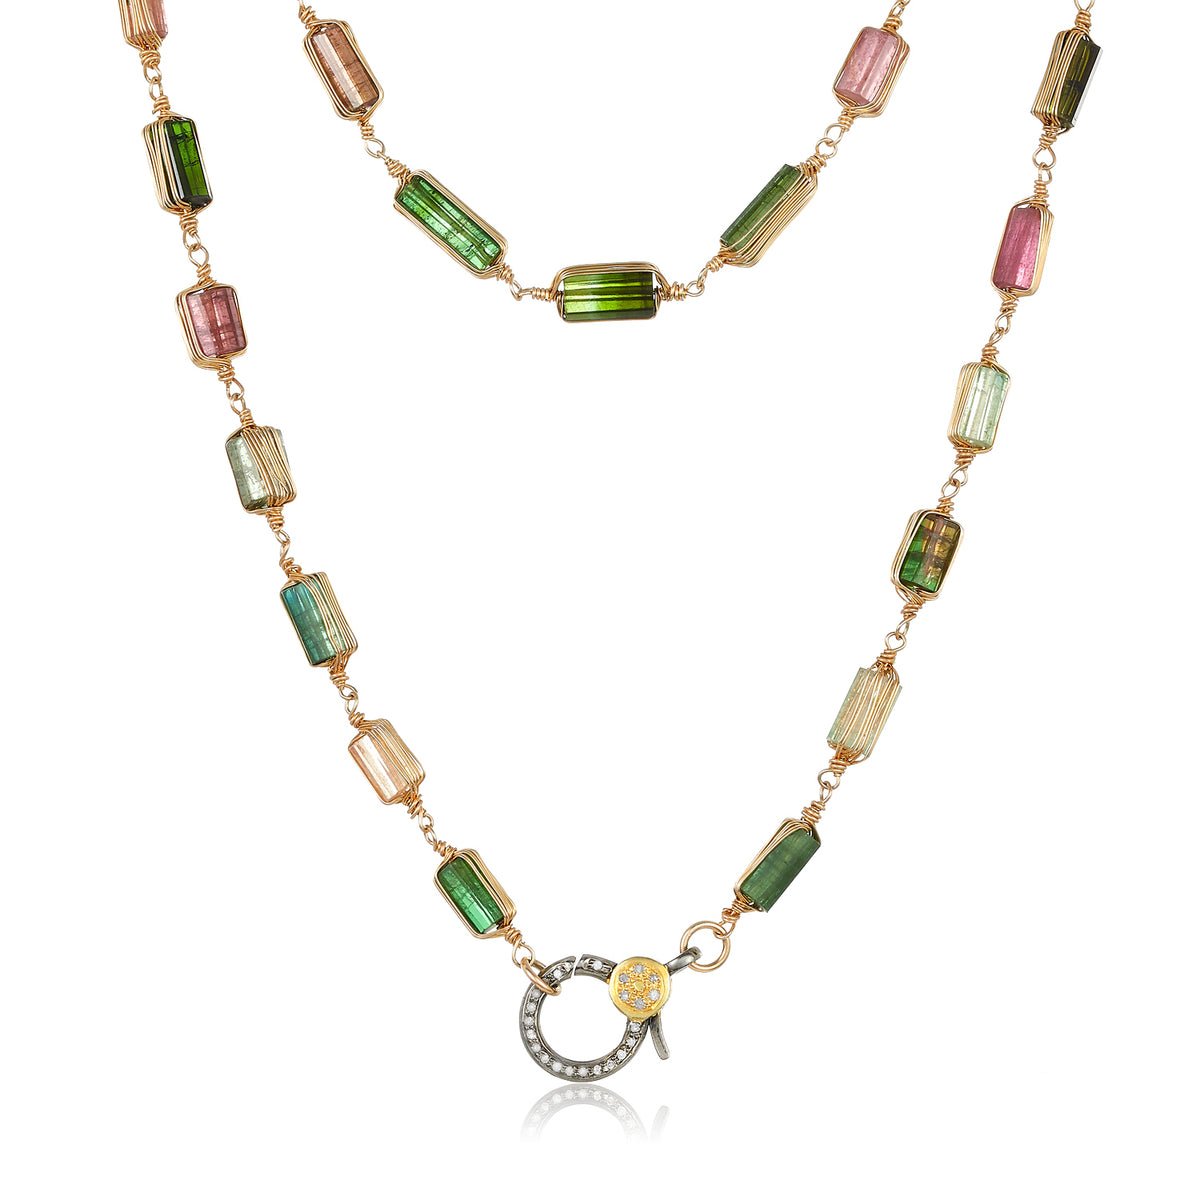 Mabel Chong Ombre Emerald Diamond Lock Necklace